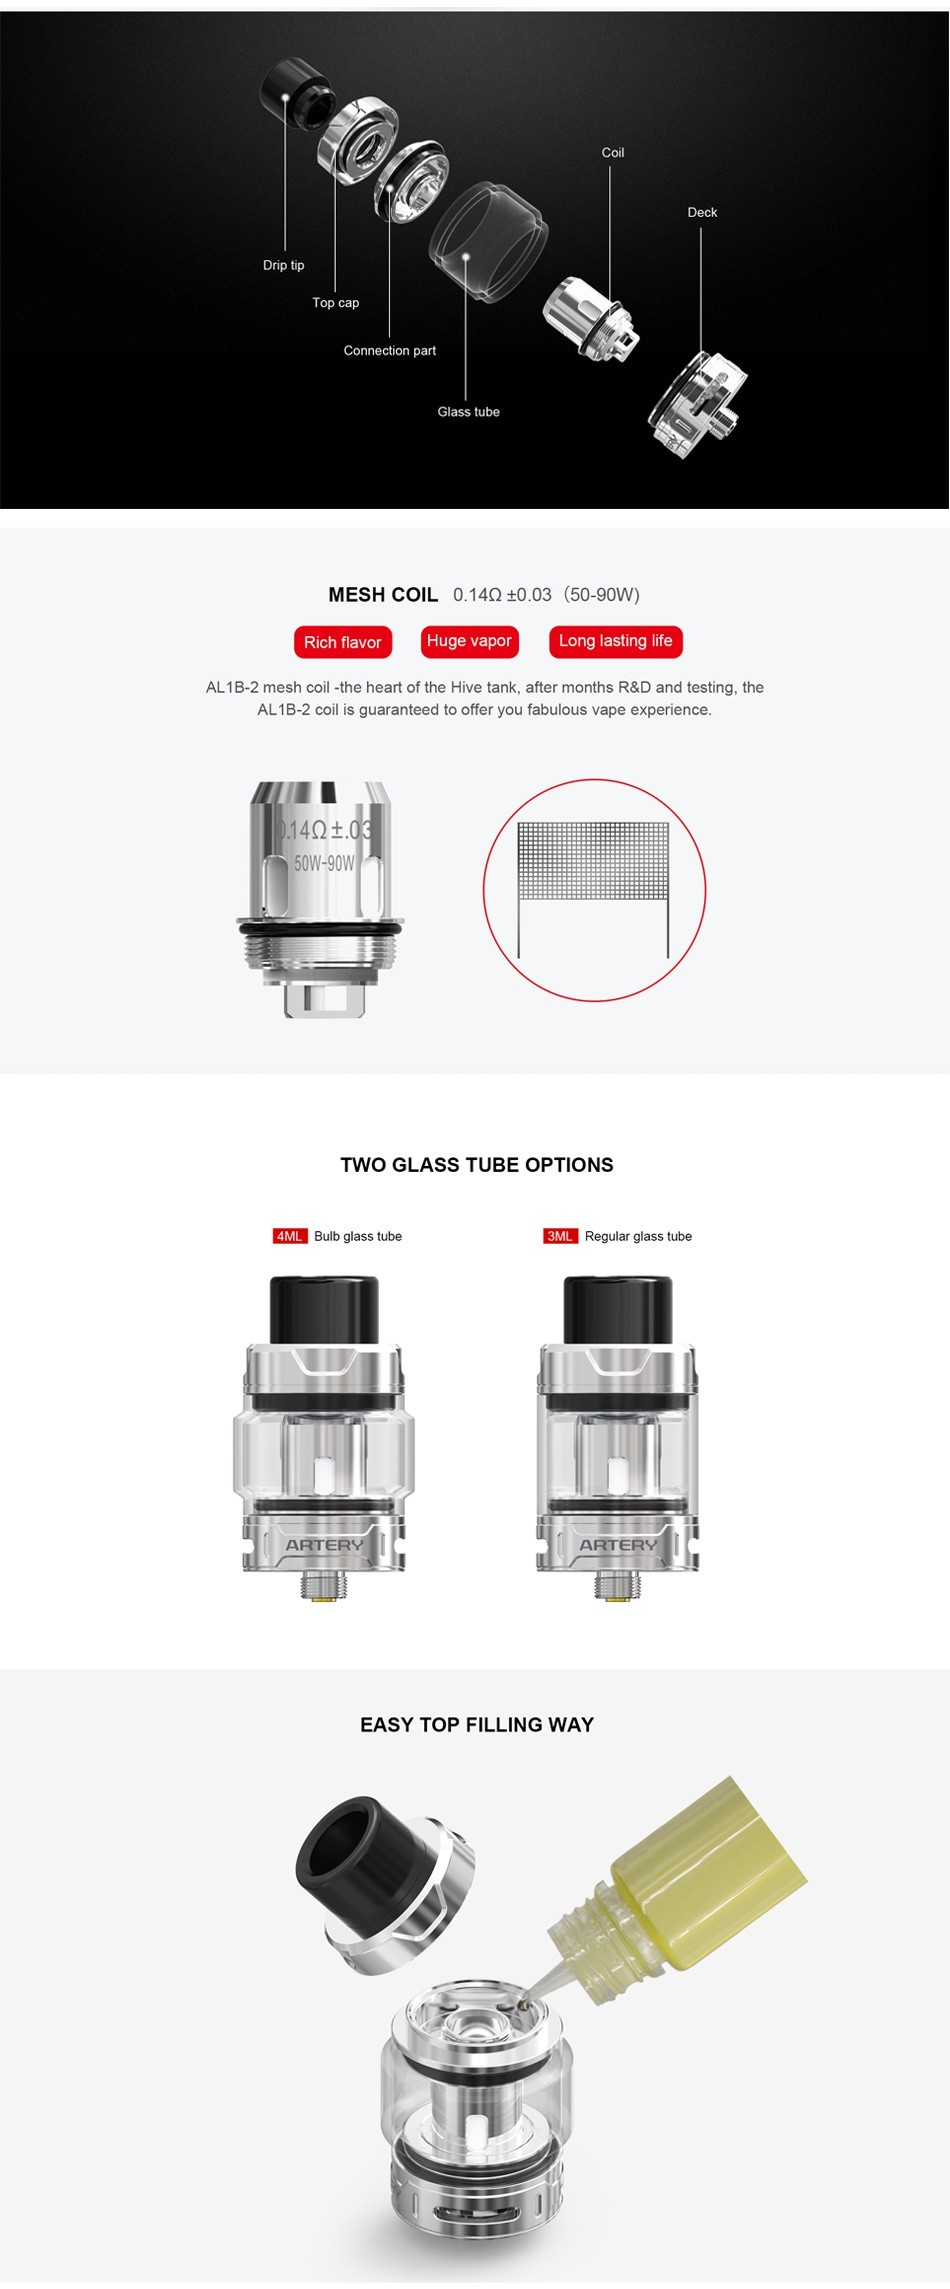 Artery Hive Mesh Tank 4ml Drip tip Connection part MESH COIL0 140 0 03 50 90W  Rich flavor ge vapor Long asting AL 1B 2 mesh coil  the heart of the Hive tank  after months R D and testing  the AL1B 2 coil is guaranteed to offer you fabulous vape experience   149 03 TWO GLASS TUBE OPTIONS 4ML Bulb glass tu 3ML Regular glass tube ARTER ARTE EASY TOP FILLING WAY